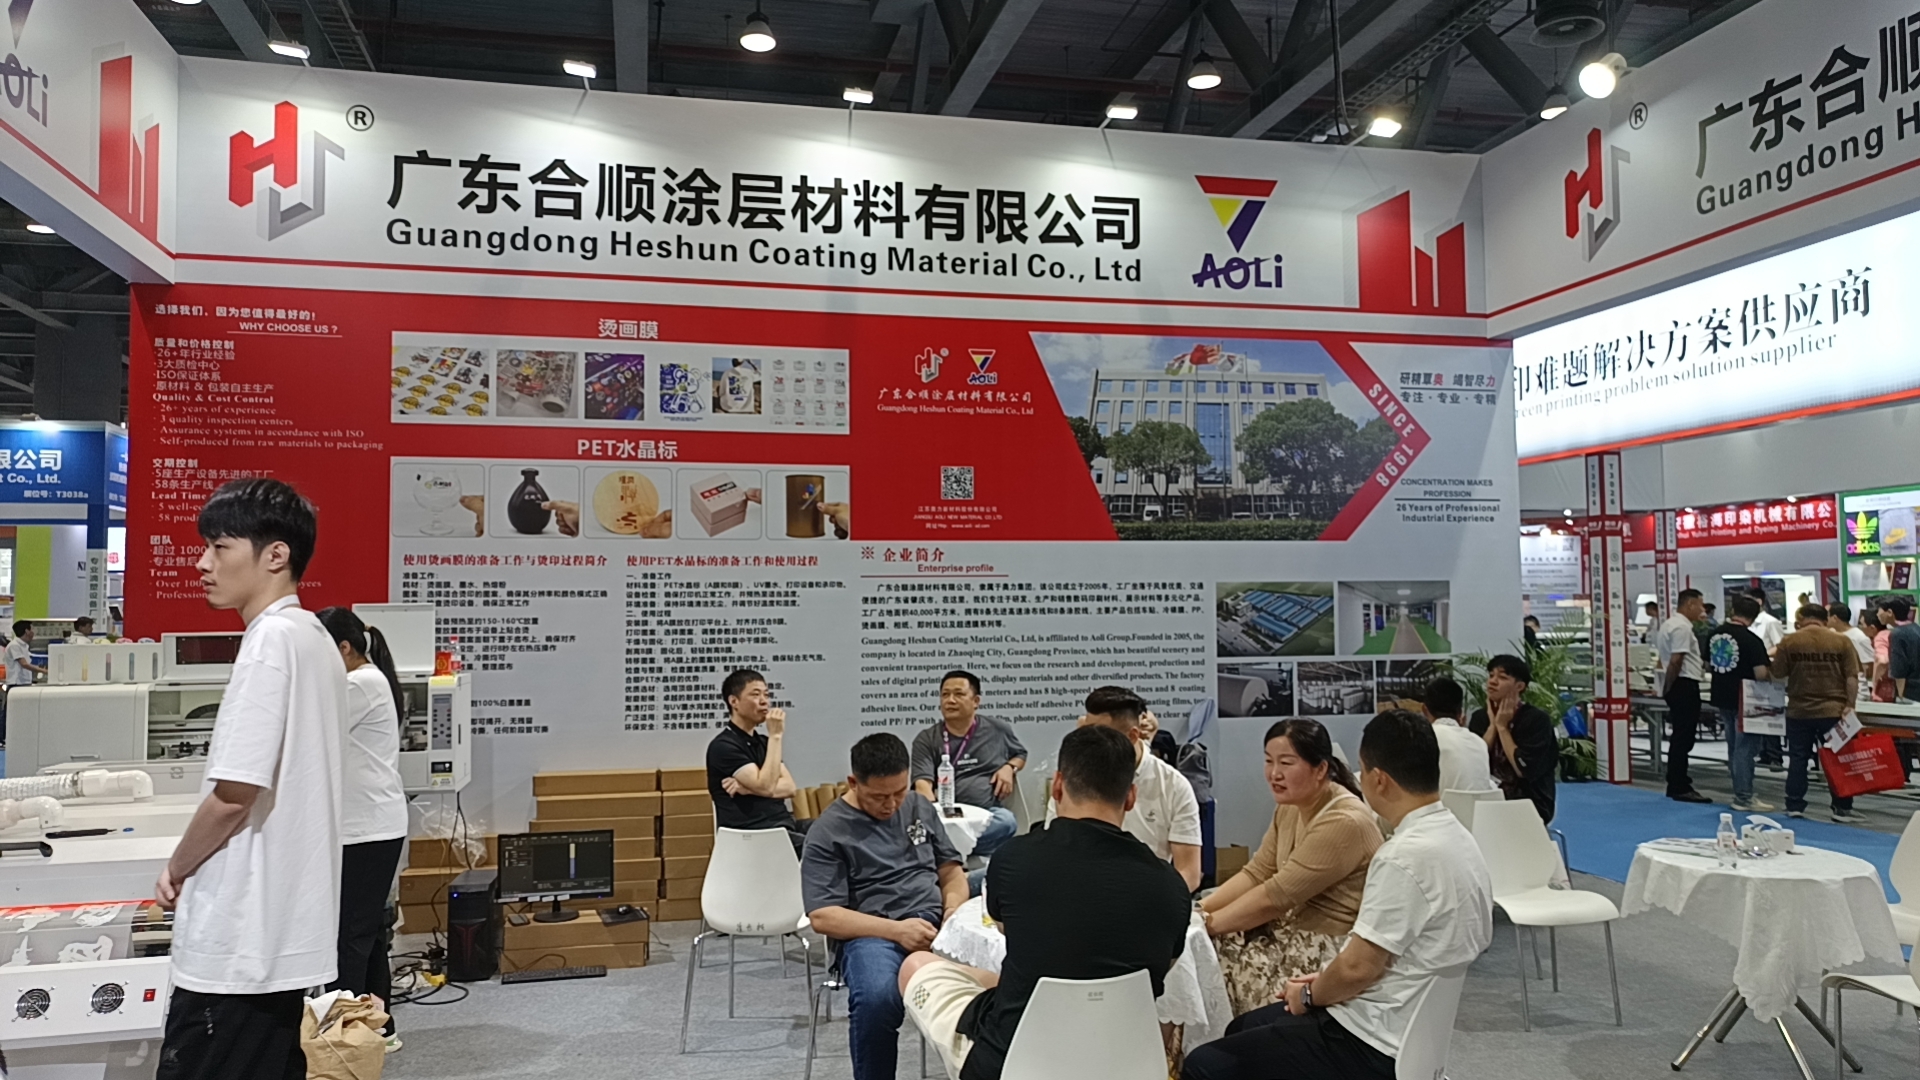 Guangzhou International Textile, Clothing Printing Industry Expo